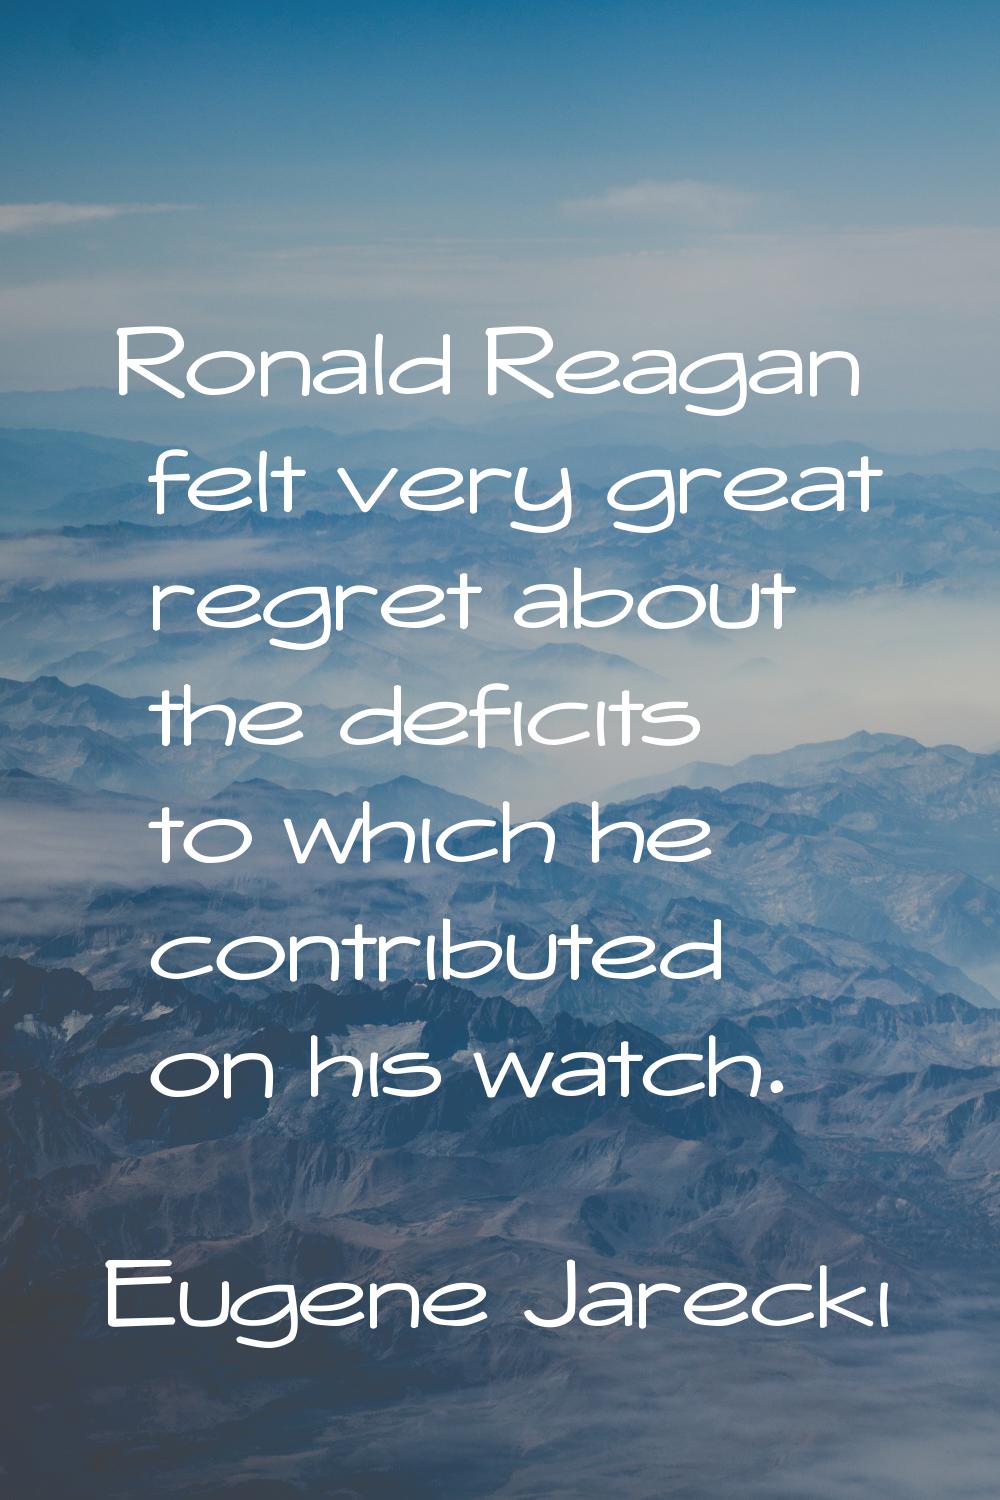 Ronald Reagan felt very great regret about the deficits to which he contributed on his watch.